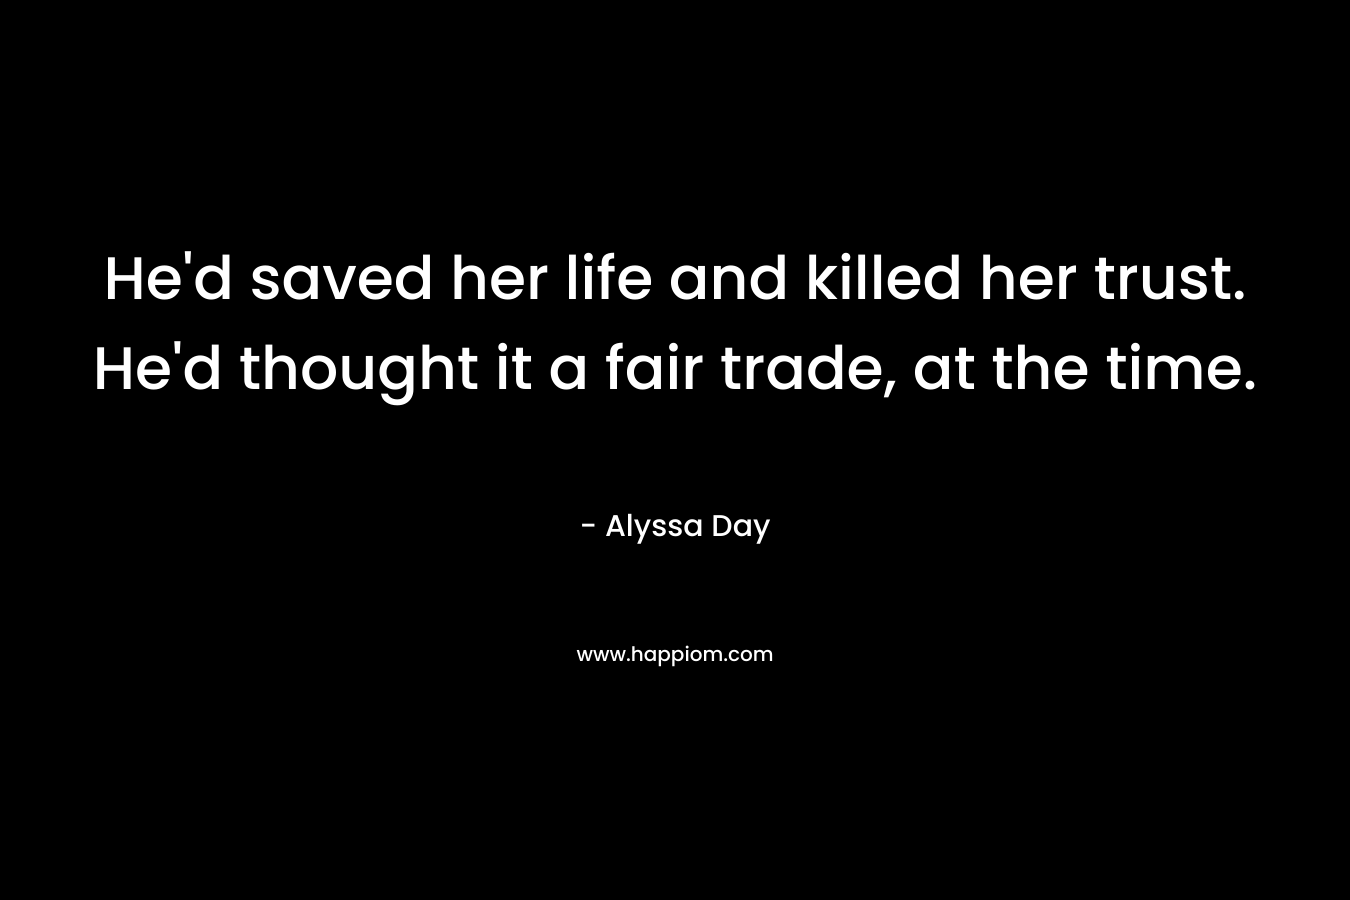 He’d saved her life and killed her trust. He’d thought it a fair trade, at the time. – Alyssa Day